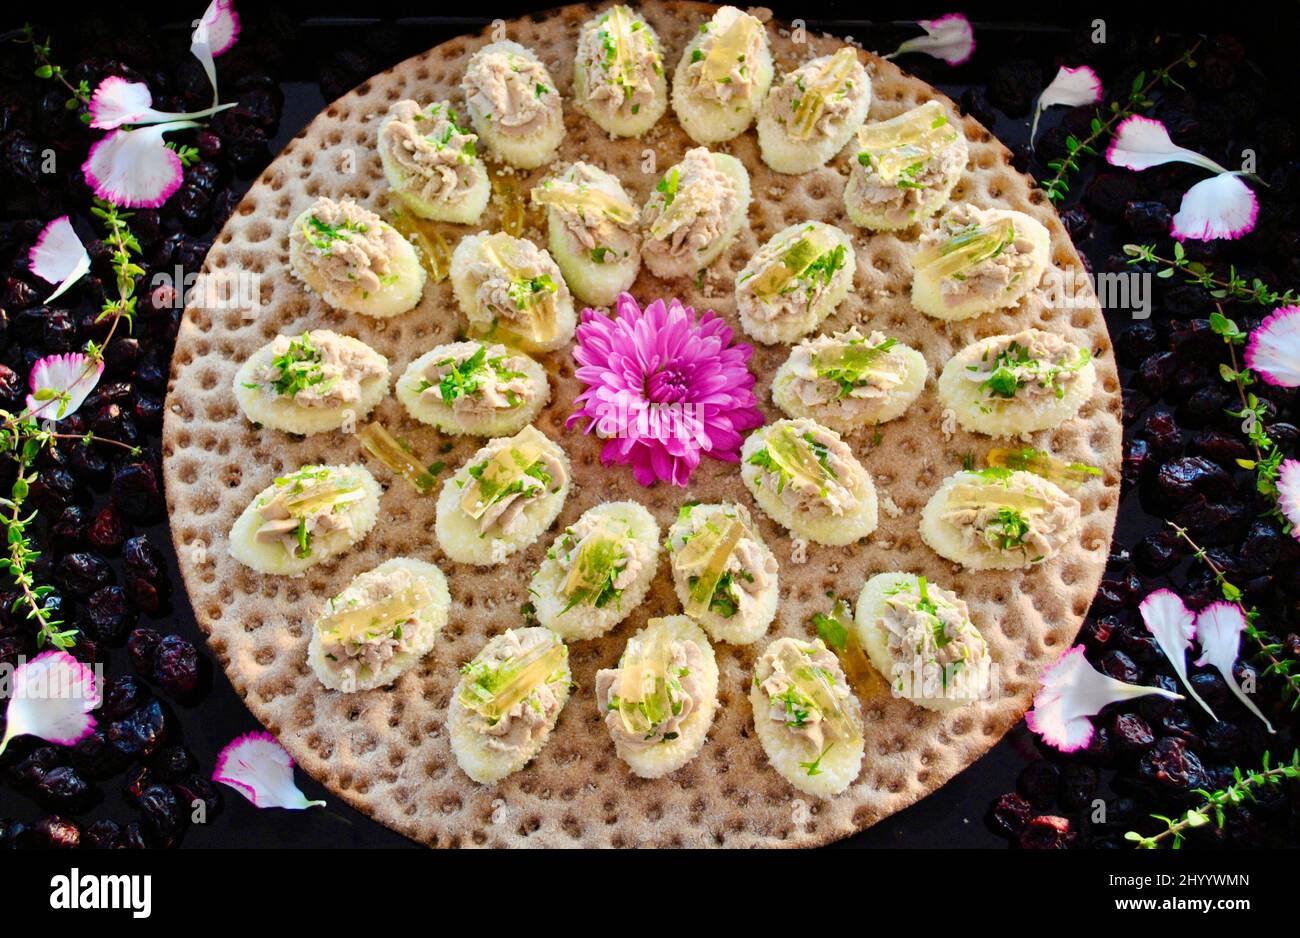 Truffle mousse on apple around mauve flower on Swedish crispbread decorated with dried cranberries and flower petals Stock Photo